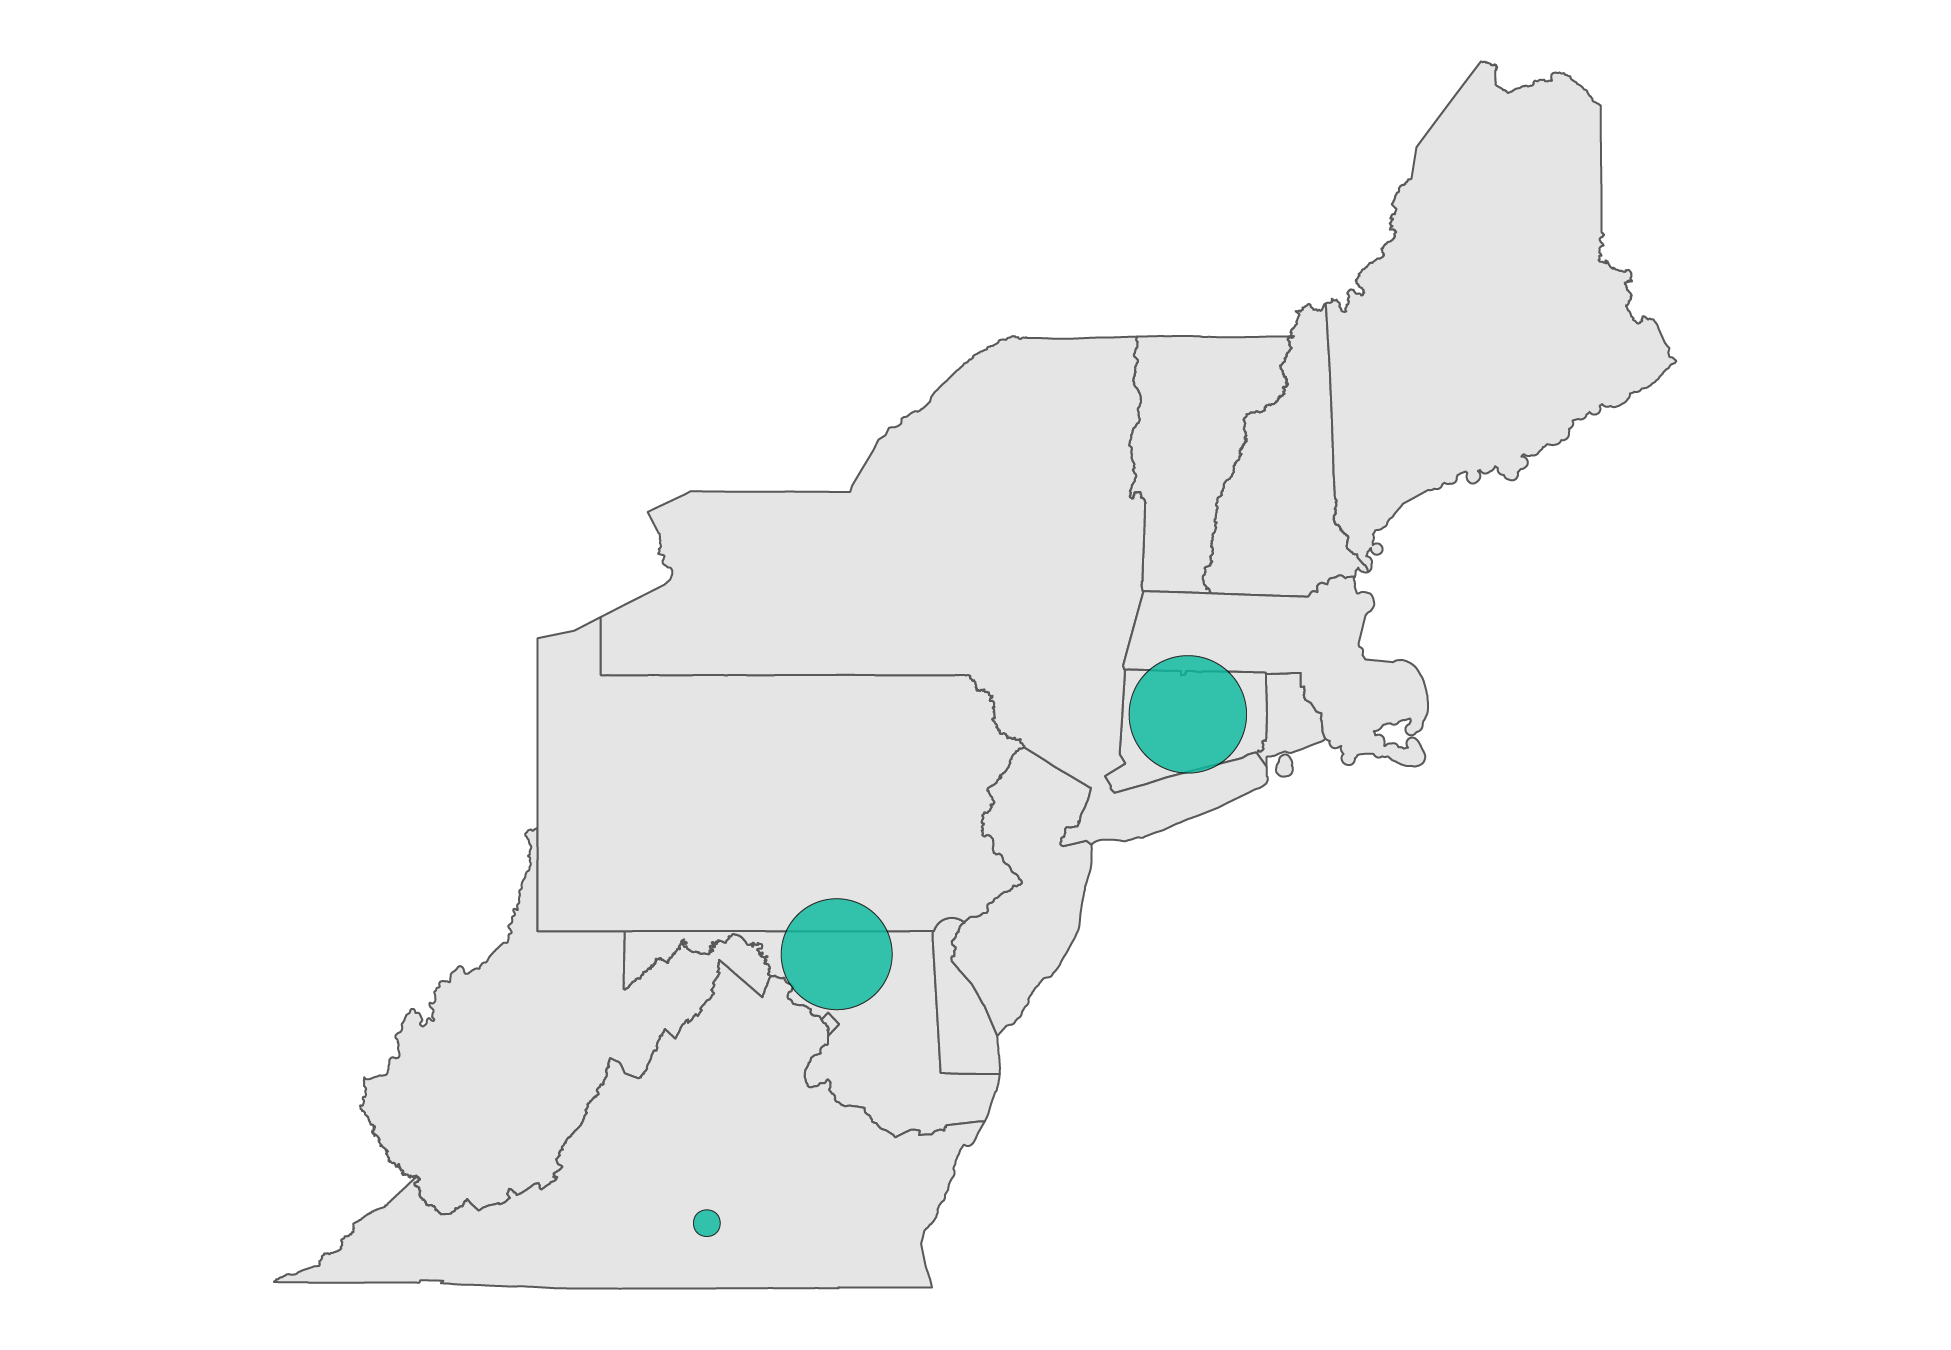 A map of the Northeast region of the United States. There are green circles over Virginia, Maryland, and Connecticut. The size of the circles represents the size of the property tax revenue gap between Black and White students in that state, minus state aid. Virginia has the smallest circle, representing a gap of $1,016. Maryland has a gap of $1,497. Connecticut has the largest circle, representing a gap of $1,574.